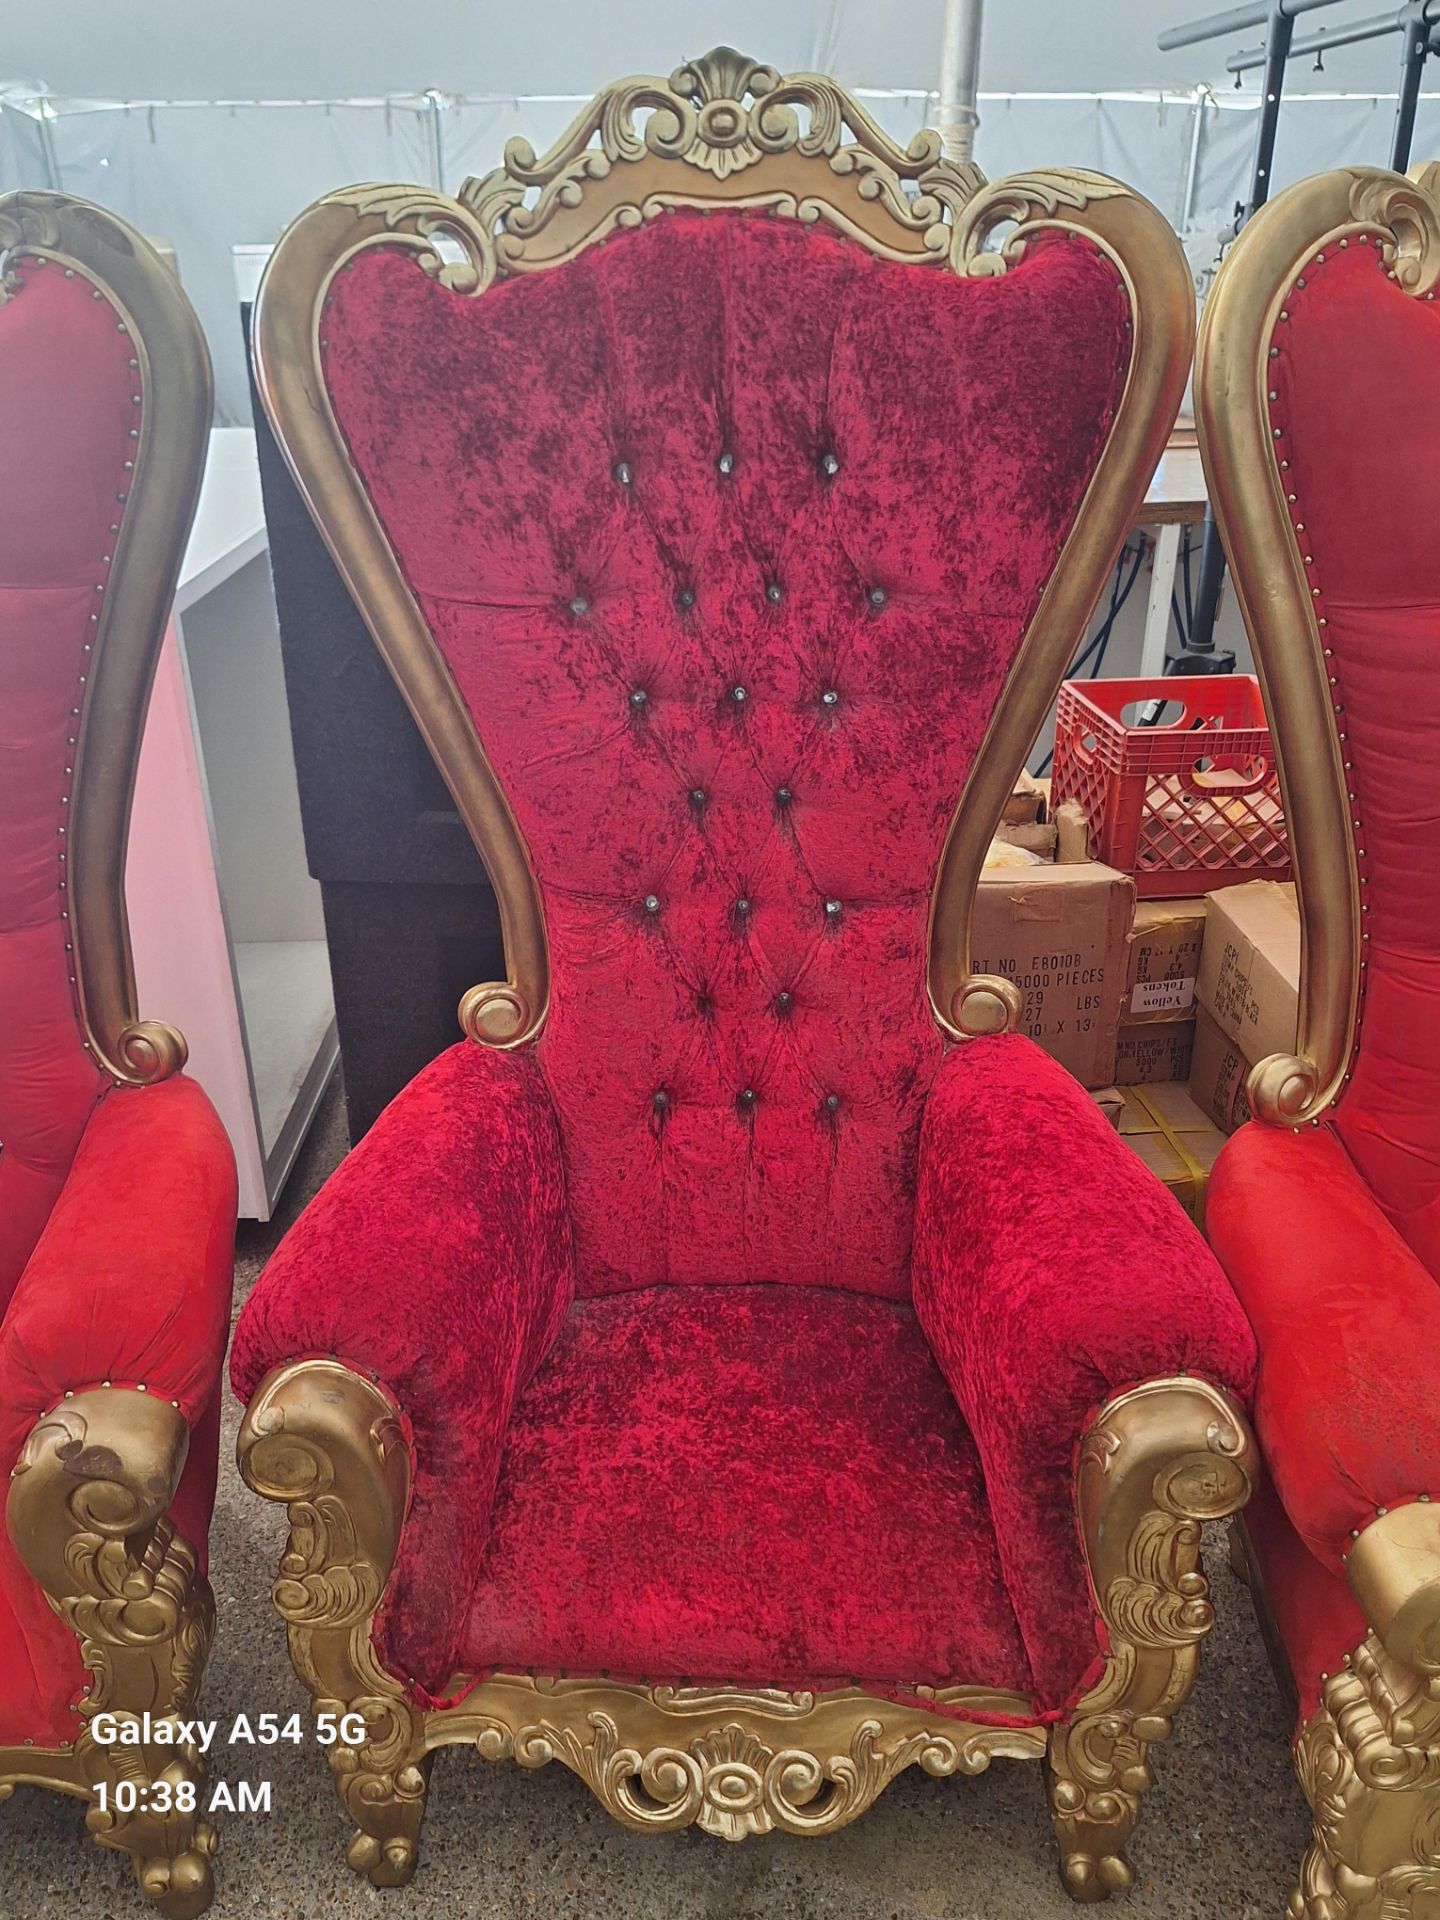 Red & Gold Throne Chair, needs repair in seat bottom